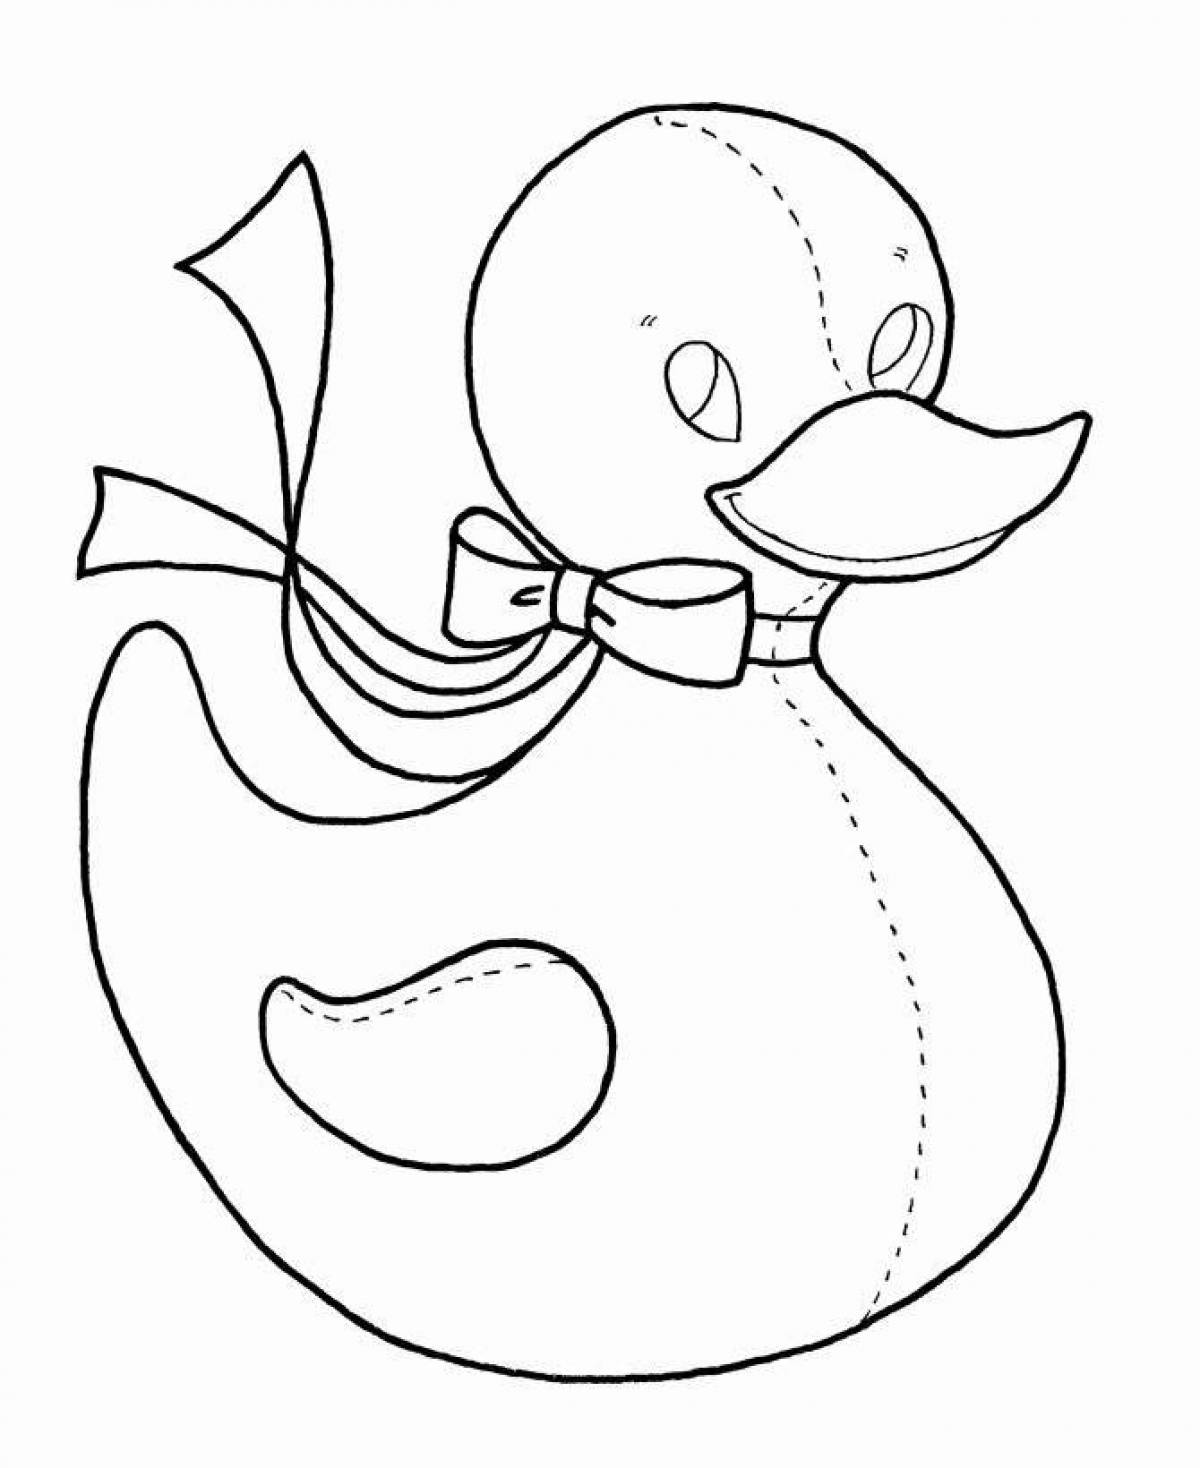 Lalafan funny duck coloring book for kids